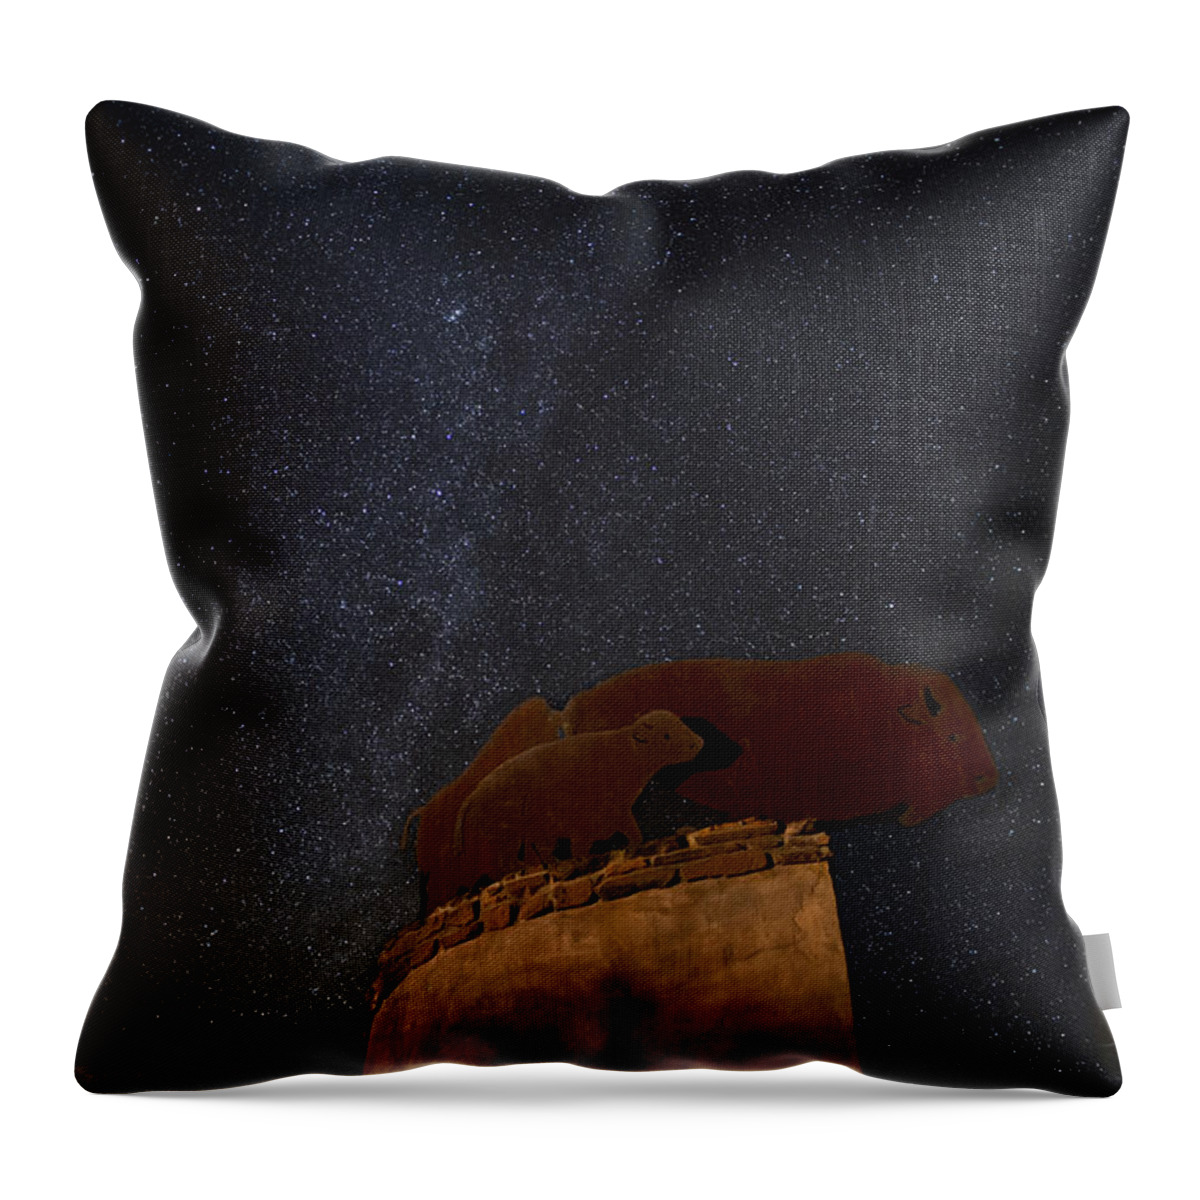 Milkyway Throw Pillow featuring the photograph MilkyWay and Bison by Melany Sarafis